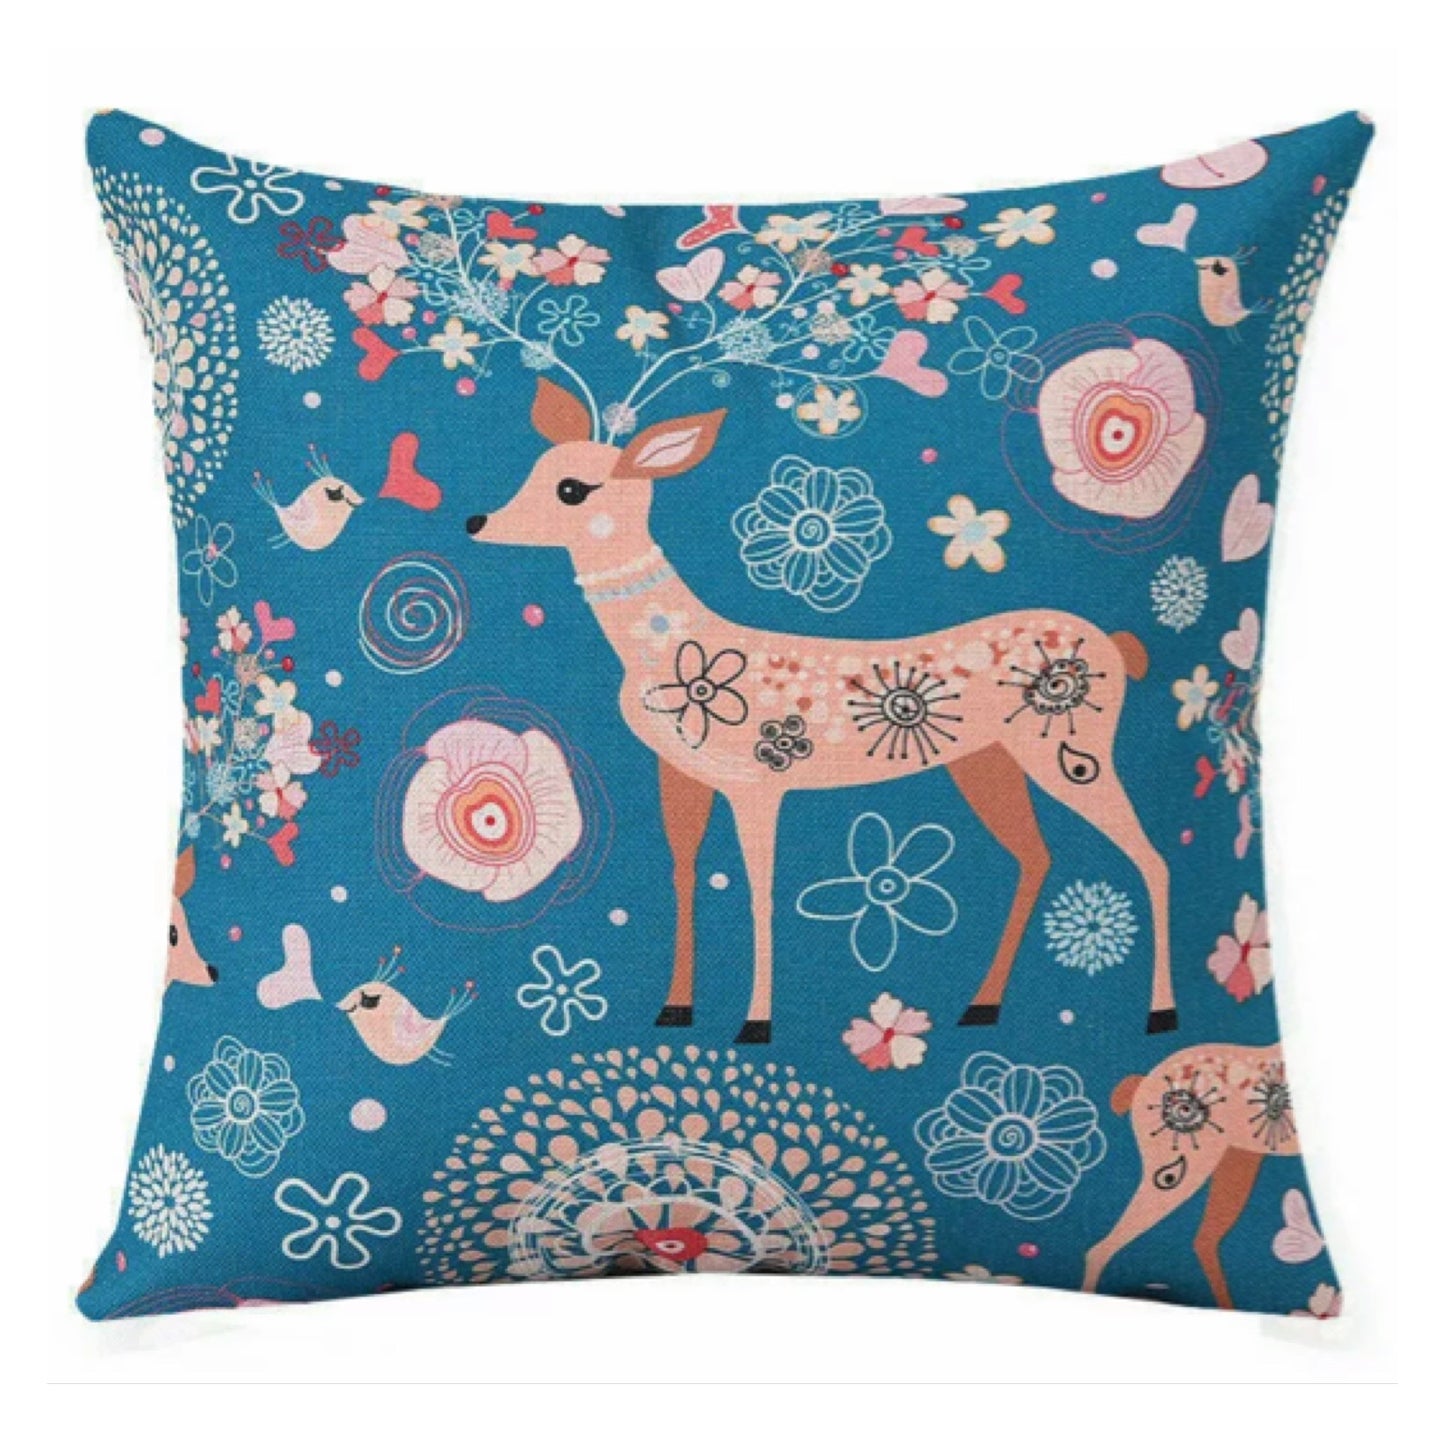 Cushion Pillow Deer Boho Floral - The Renmy Store Homewares & Gifts 